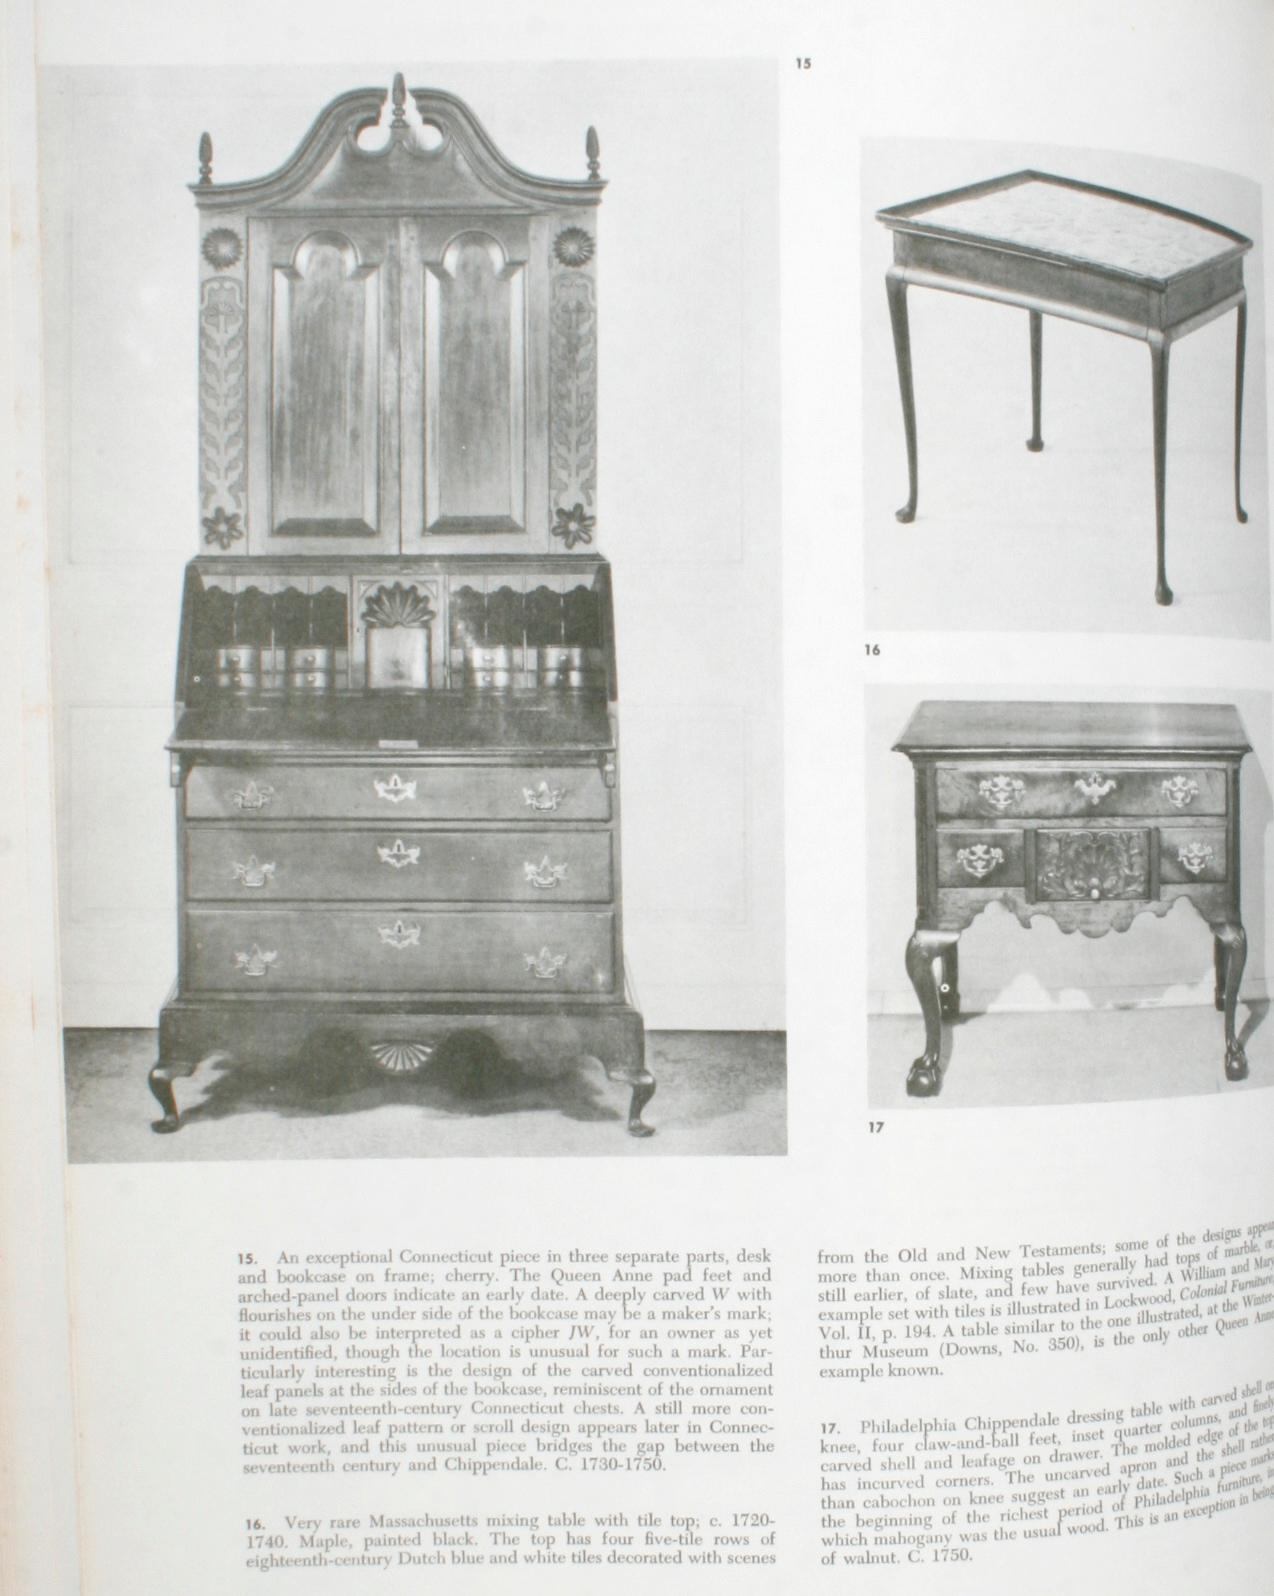 Antiques Treasury of Furniture and Other Decorative Arts 11